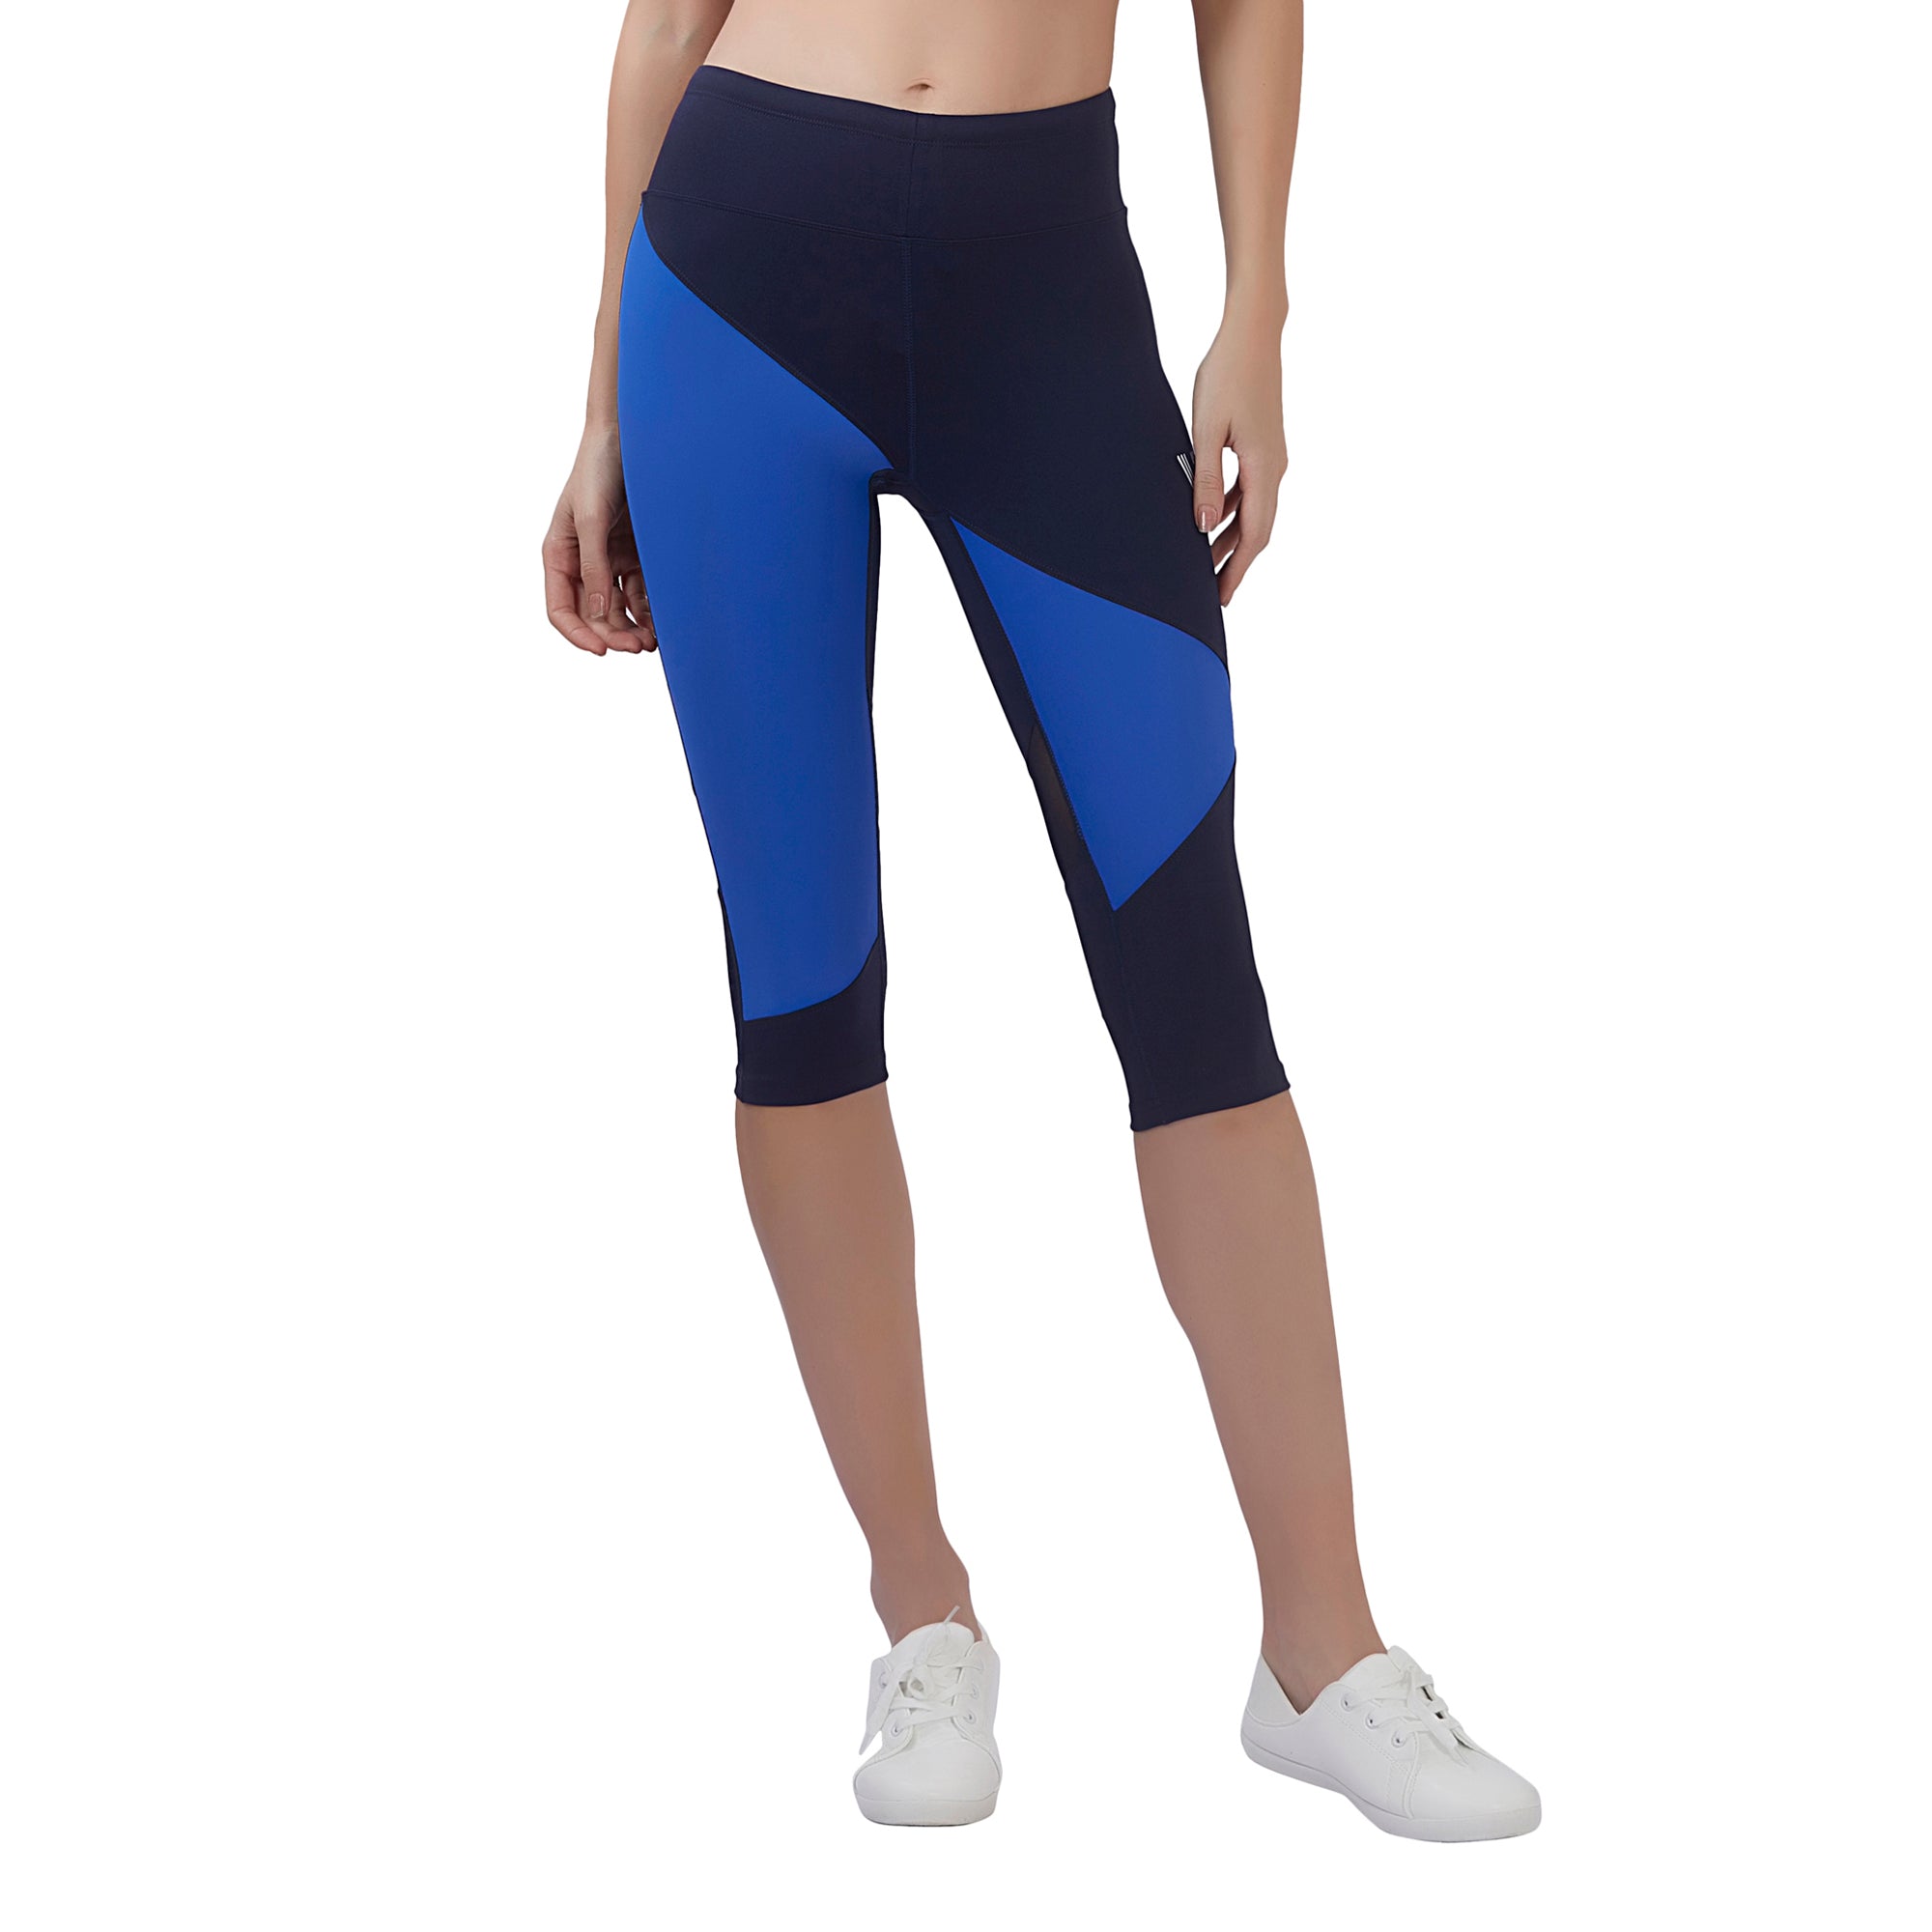 The Boost Women LEGGING (High Rise Waistband with hydro-dry Tech)